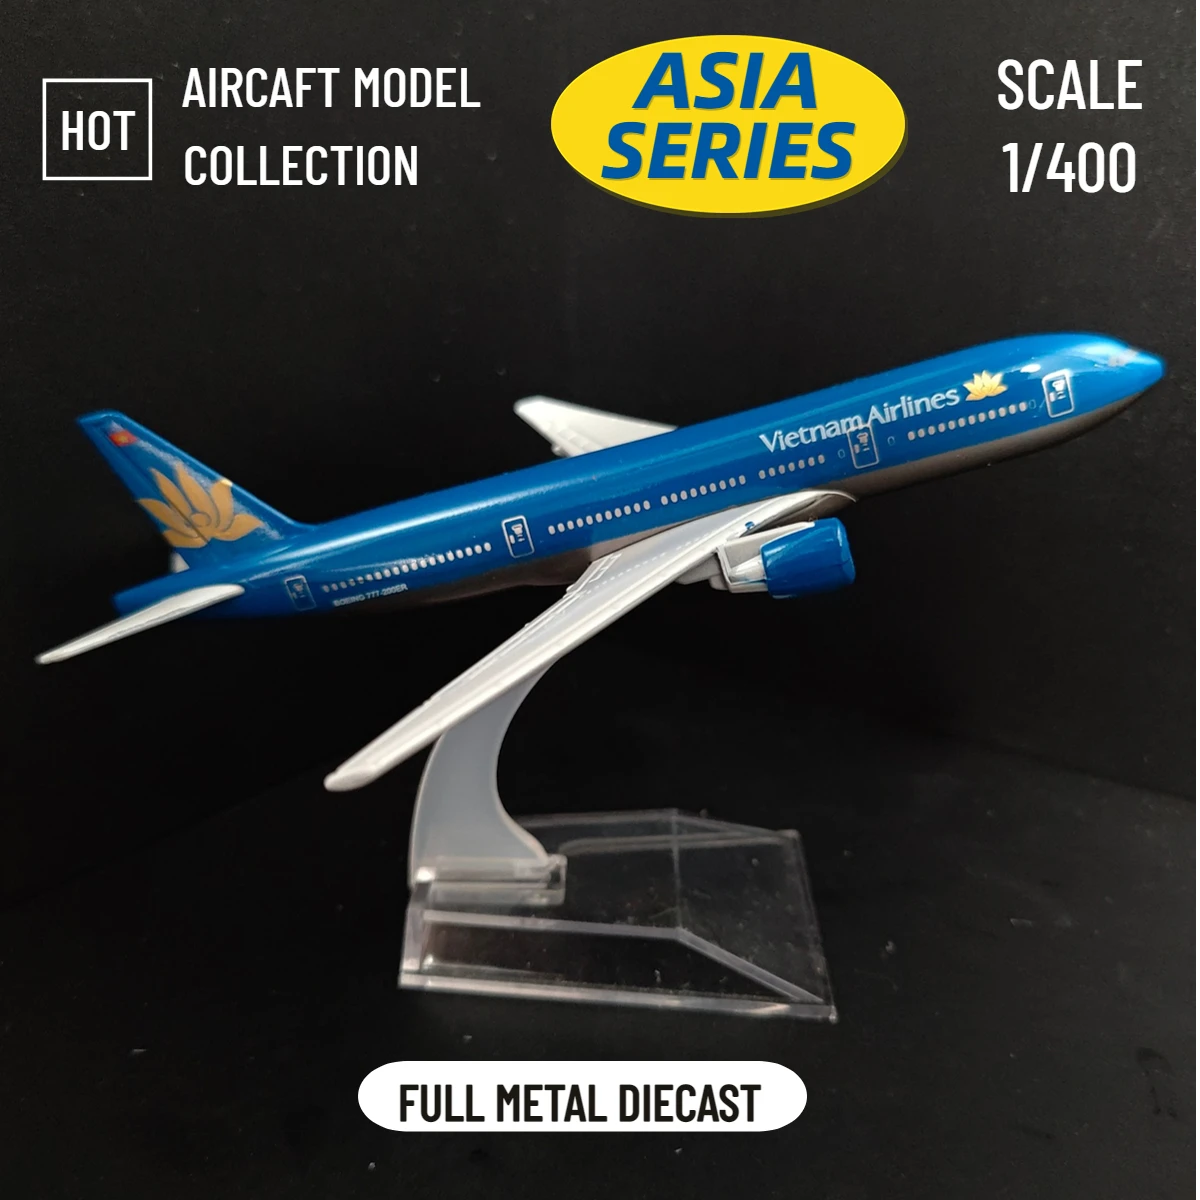 

Scale 1:400 Metal Replica Aircraft 15cm Vietnam A350 Asia Airline Boeing Airbus Diecast Model Aviation Miniature Gift for Boys